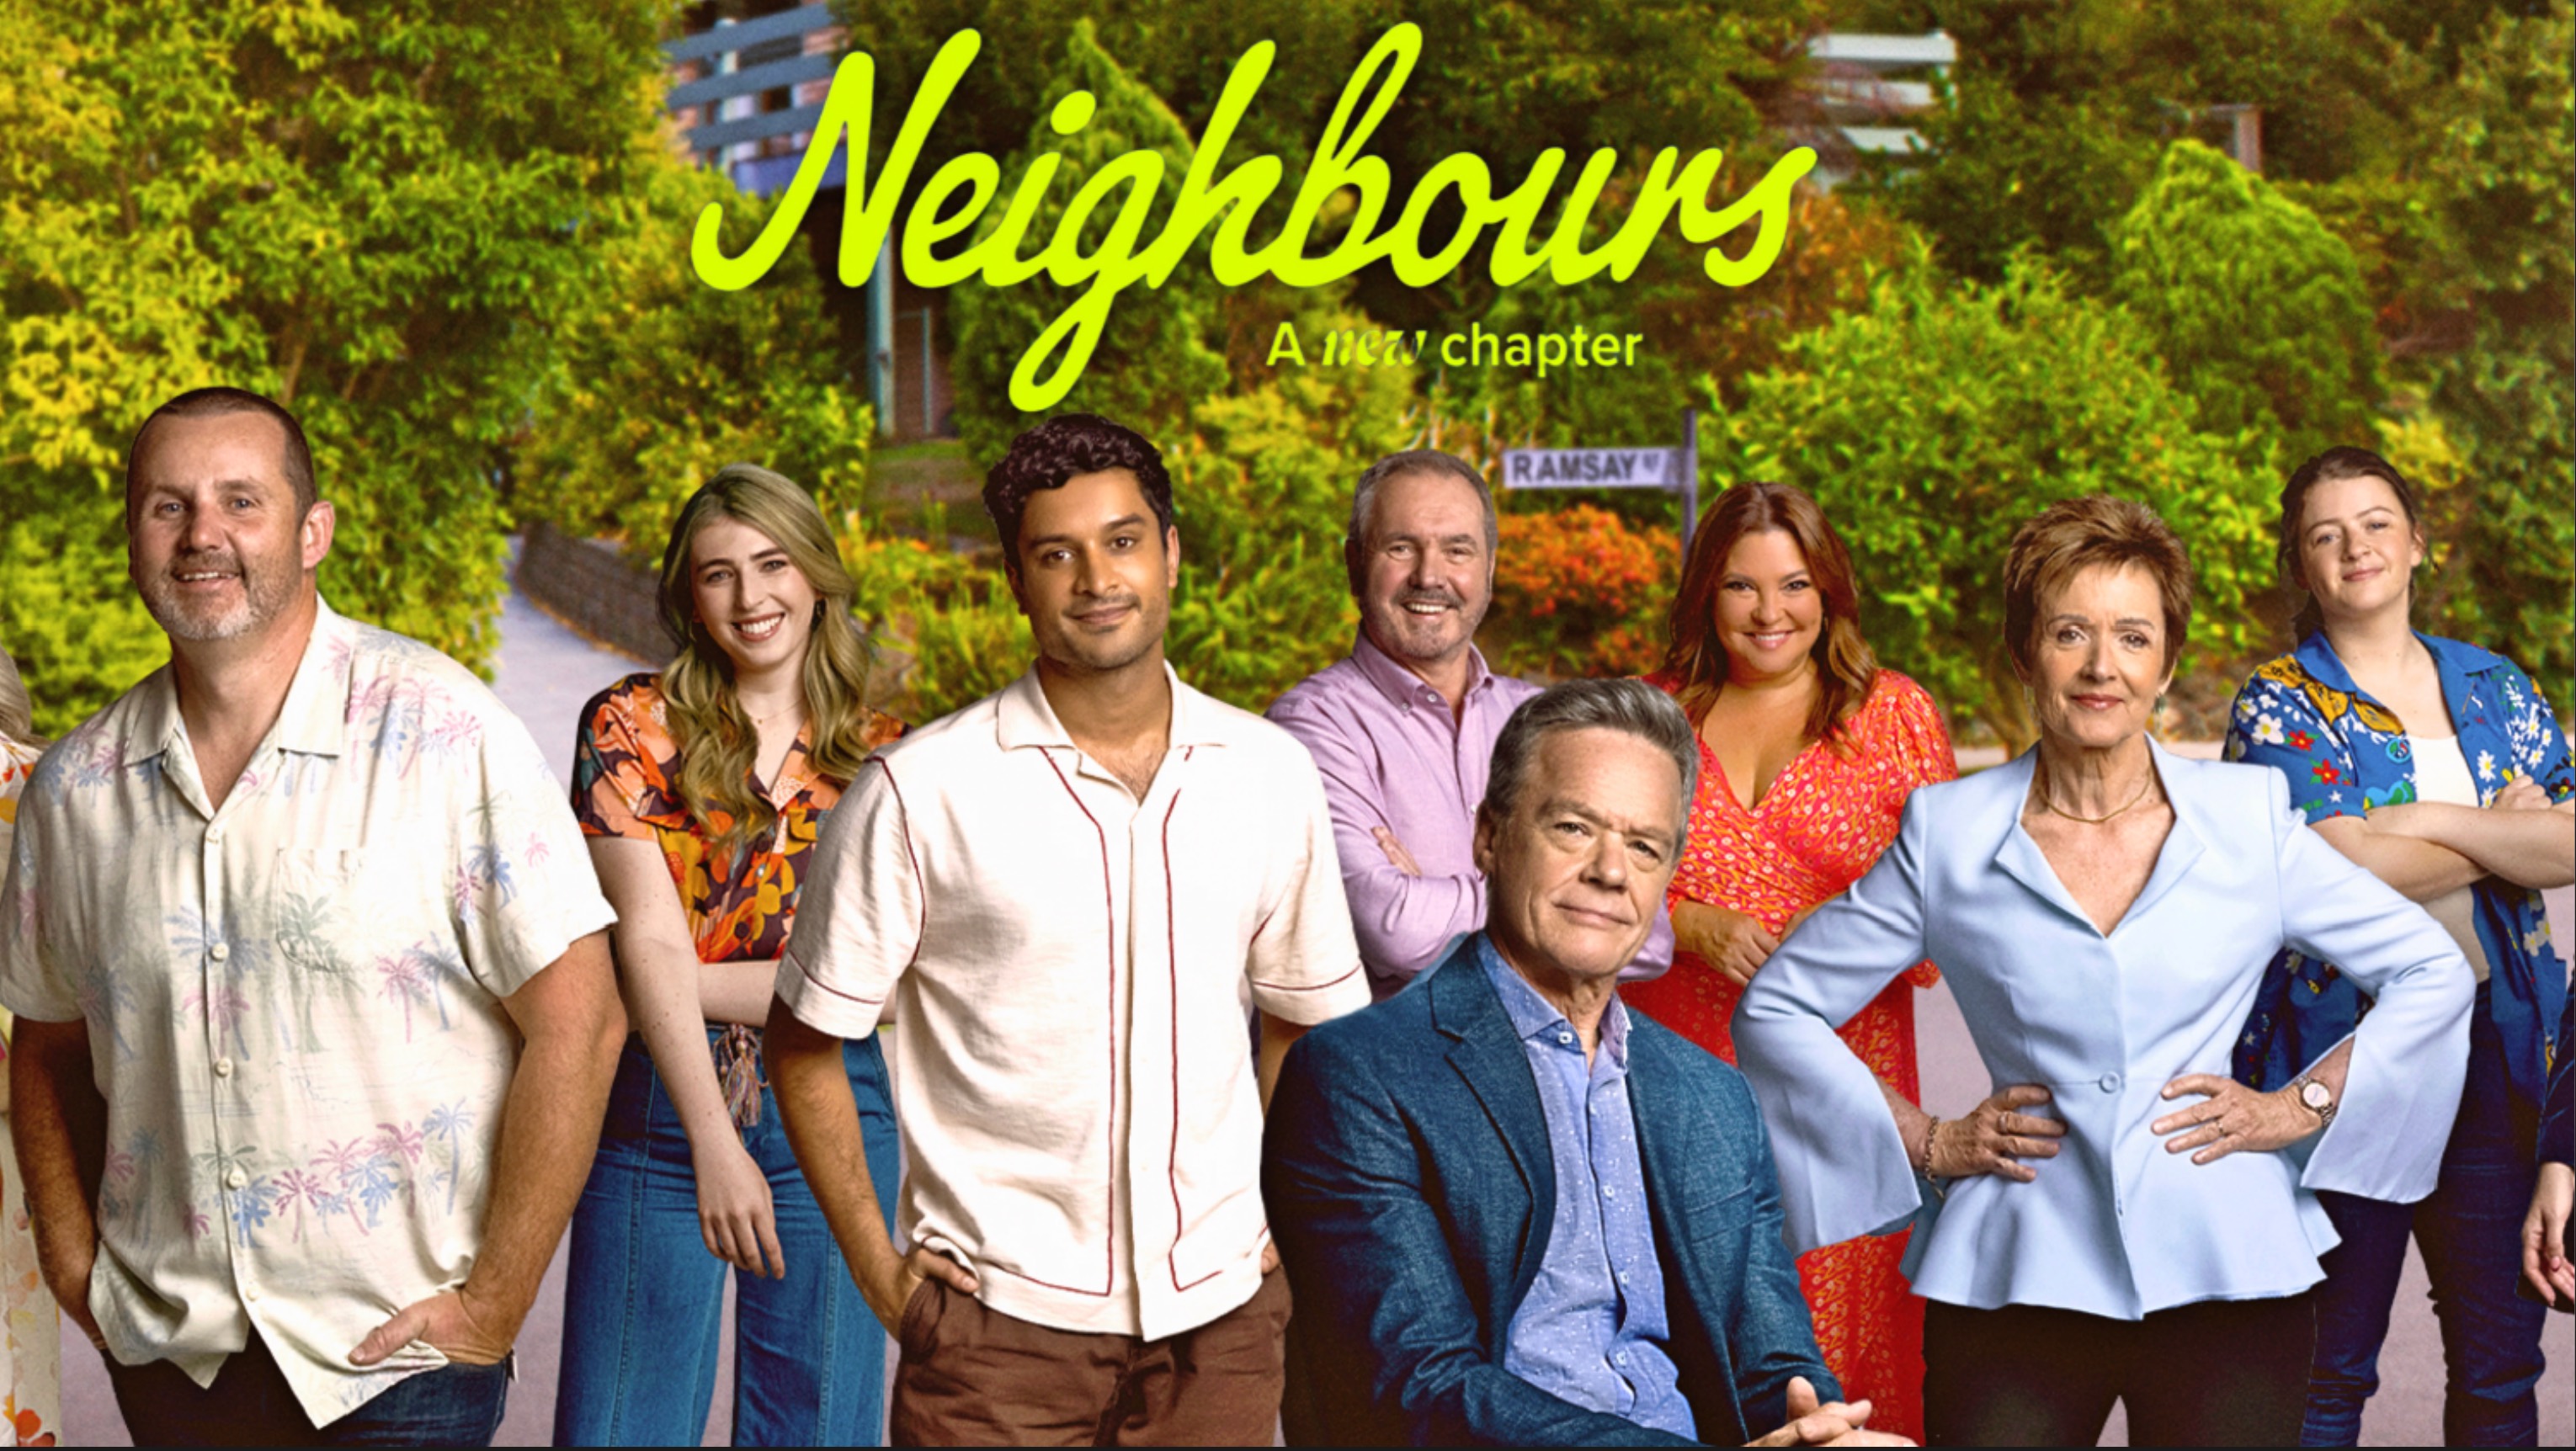 caz waugh recommends Watch Neighbours Online Free